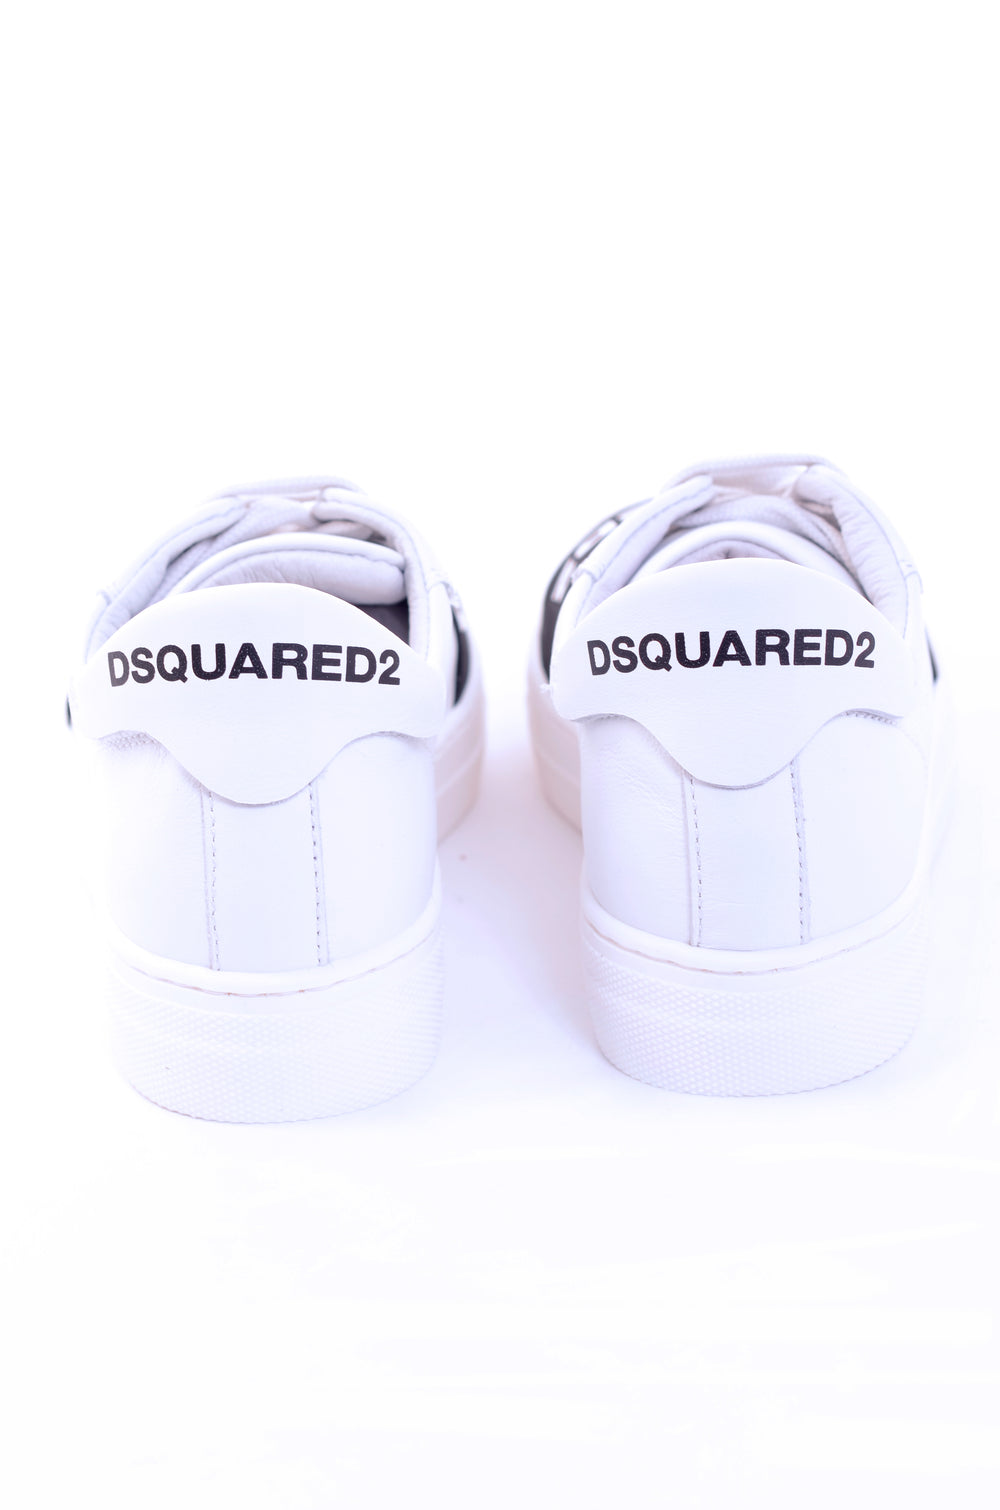 dsquared2 sneakers sizing